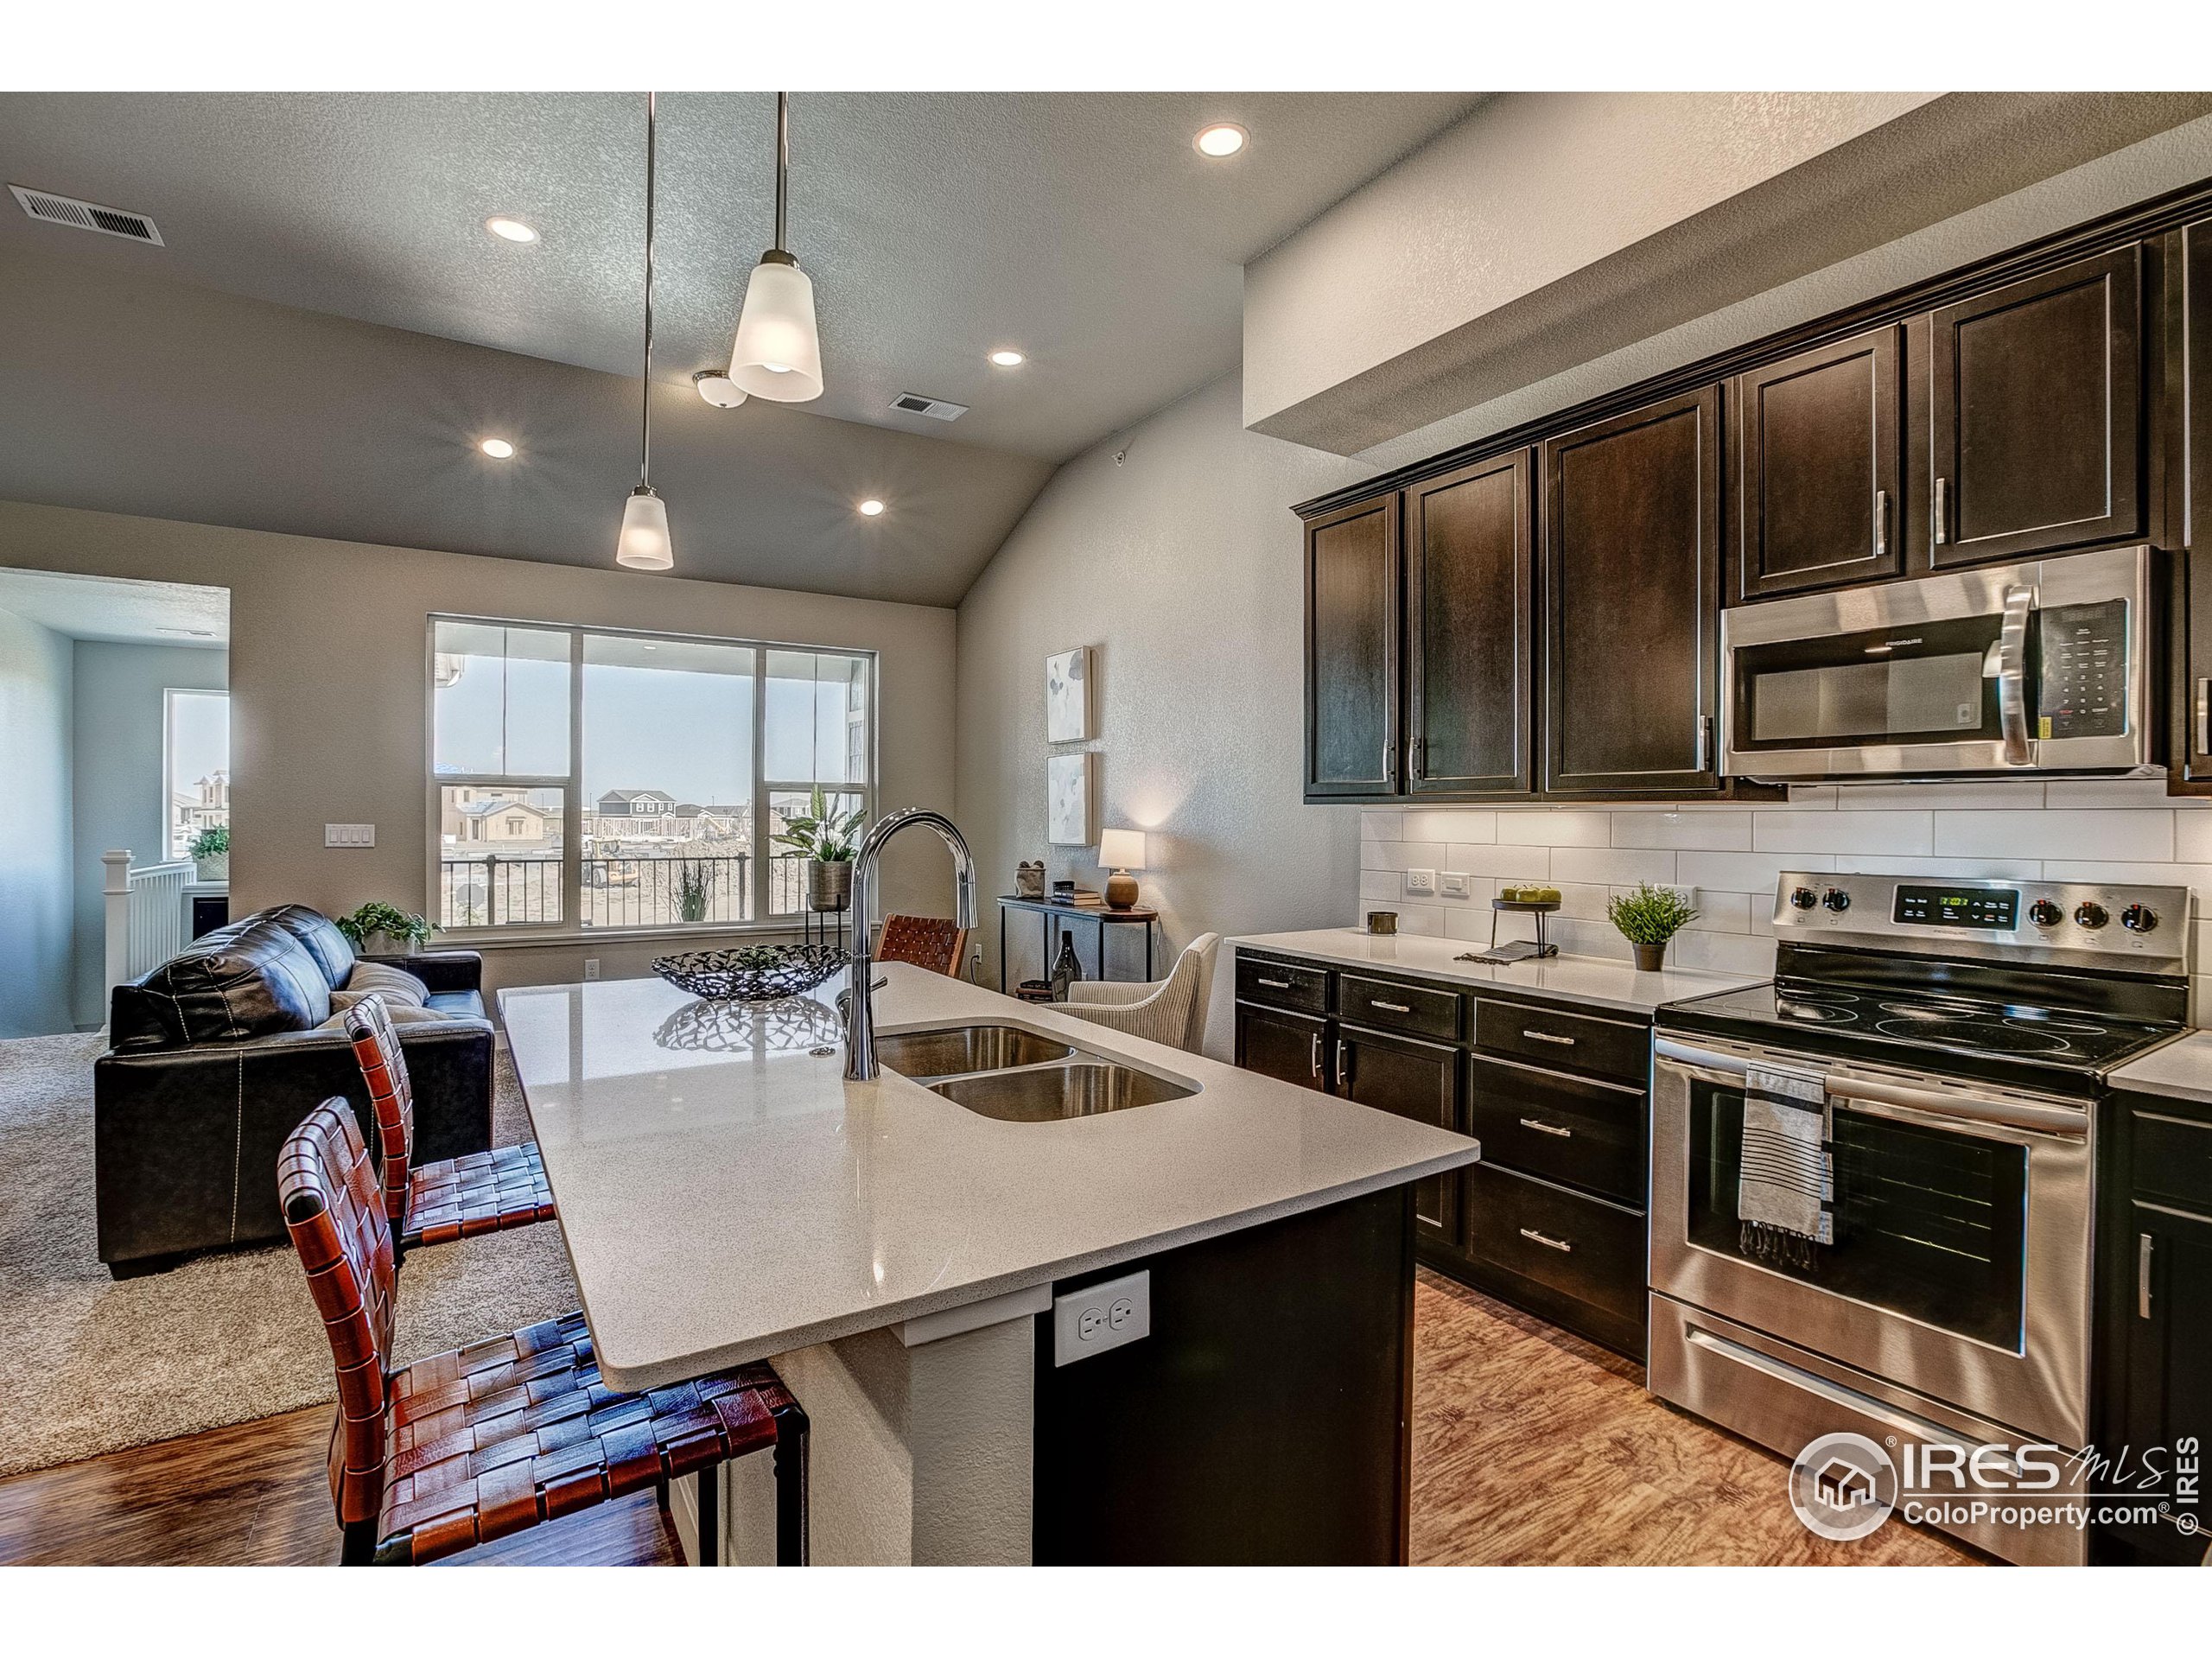 a kitchen with stainless steel appliances kitchen island granite countertop a stove a sink dishwasher a dining table and chairs with wooden cabinets